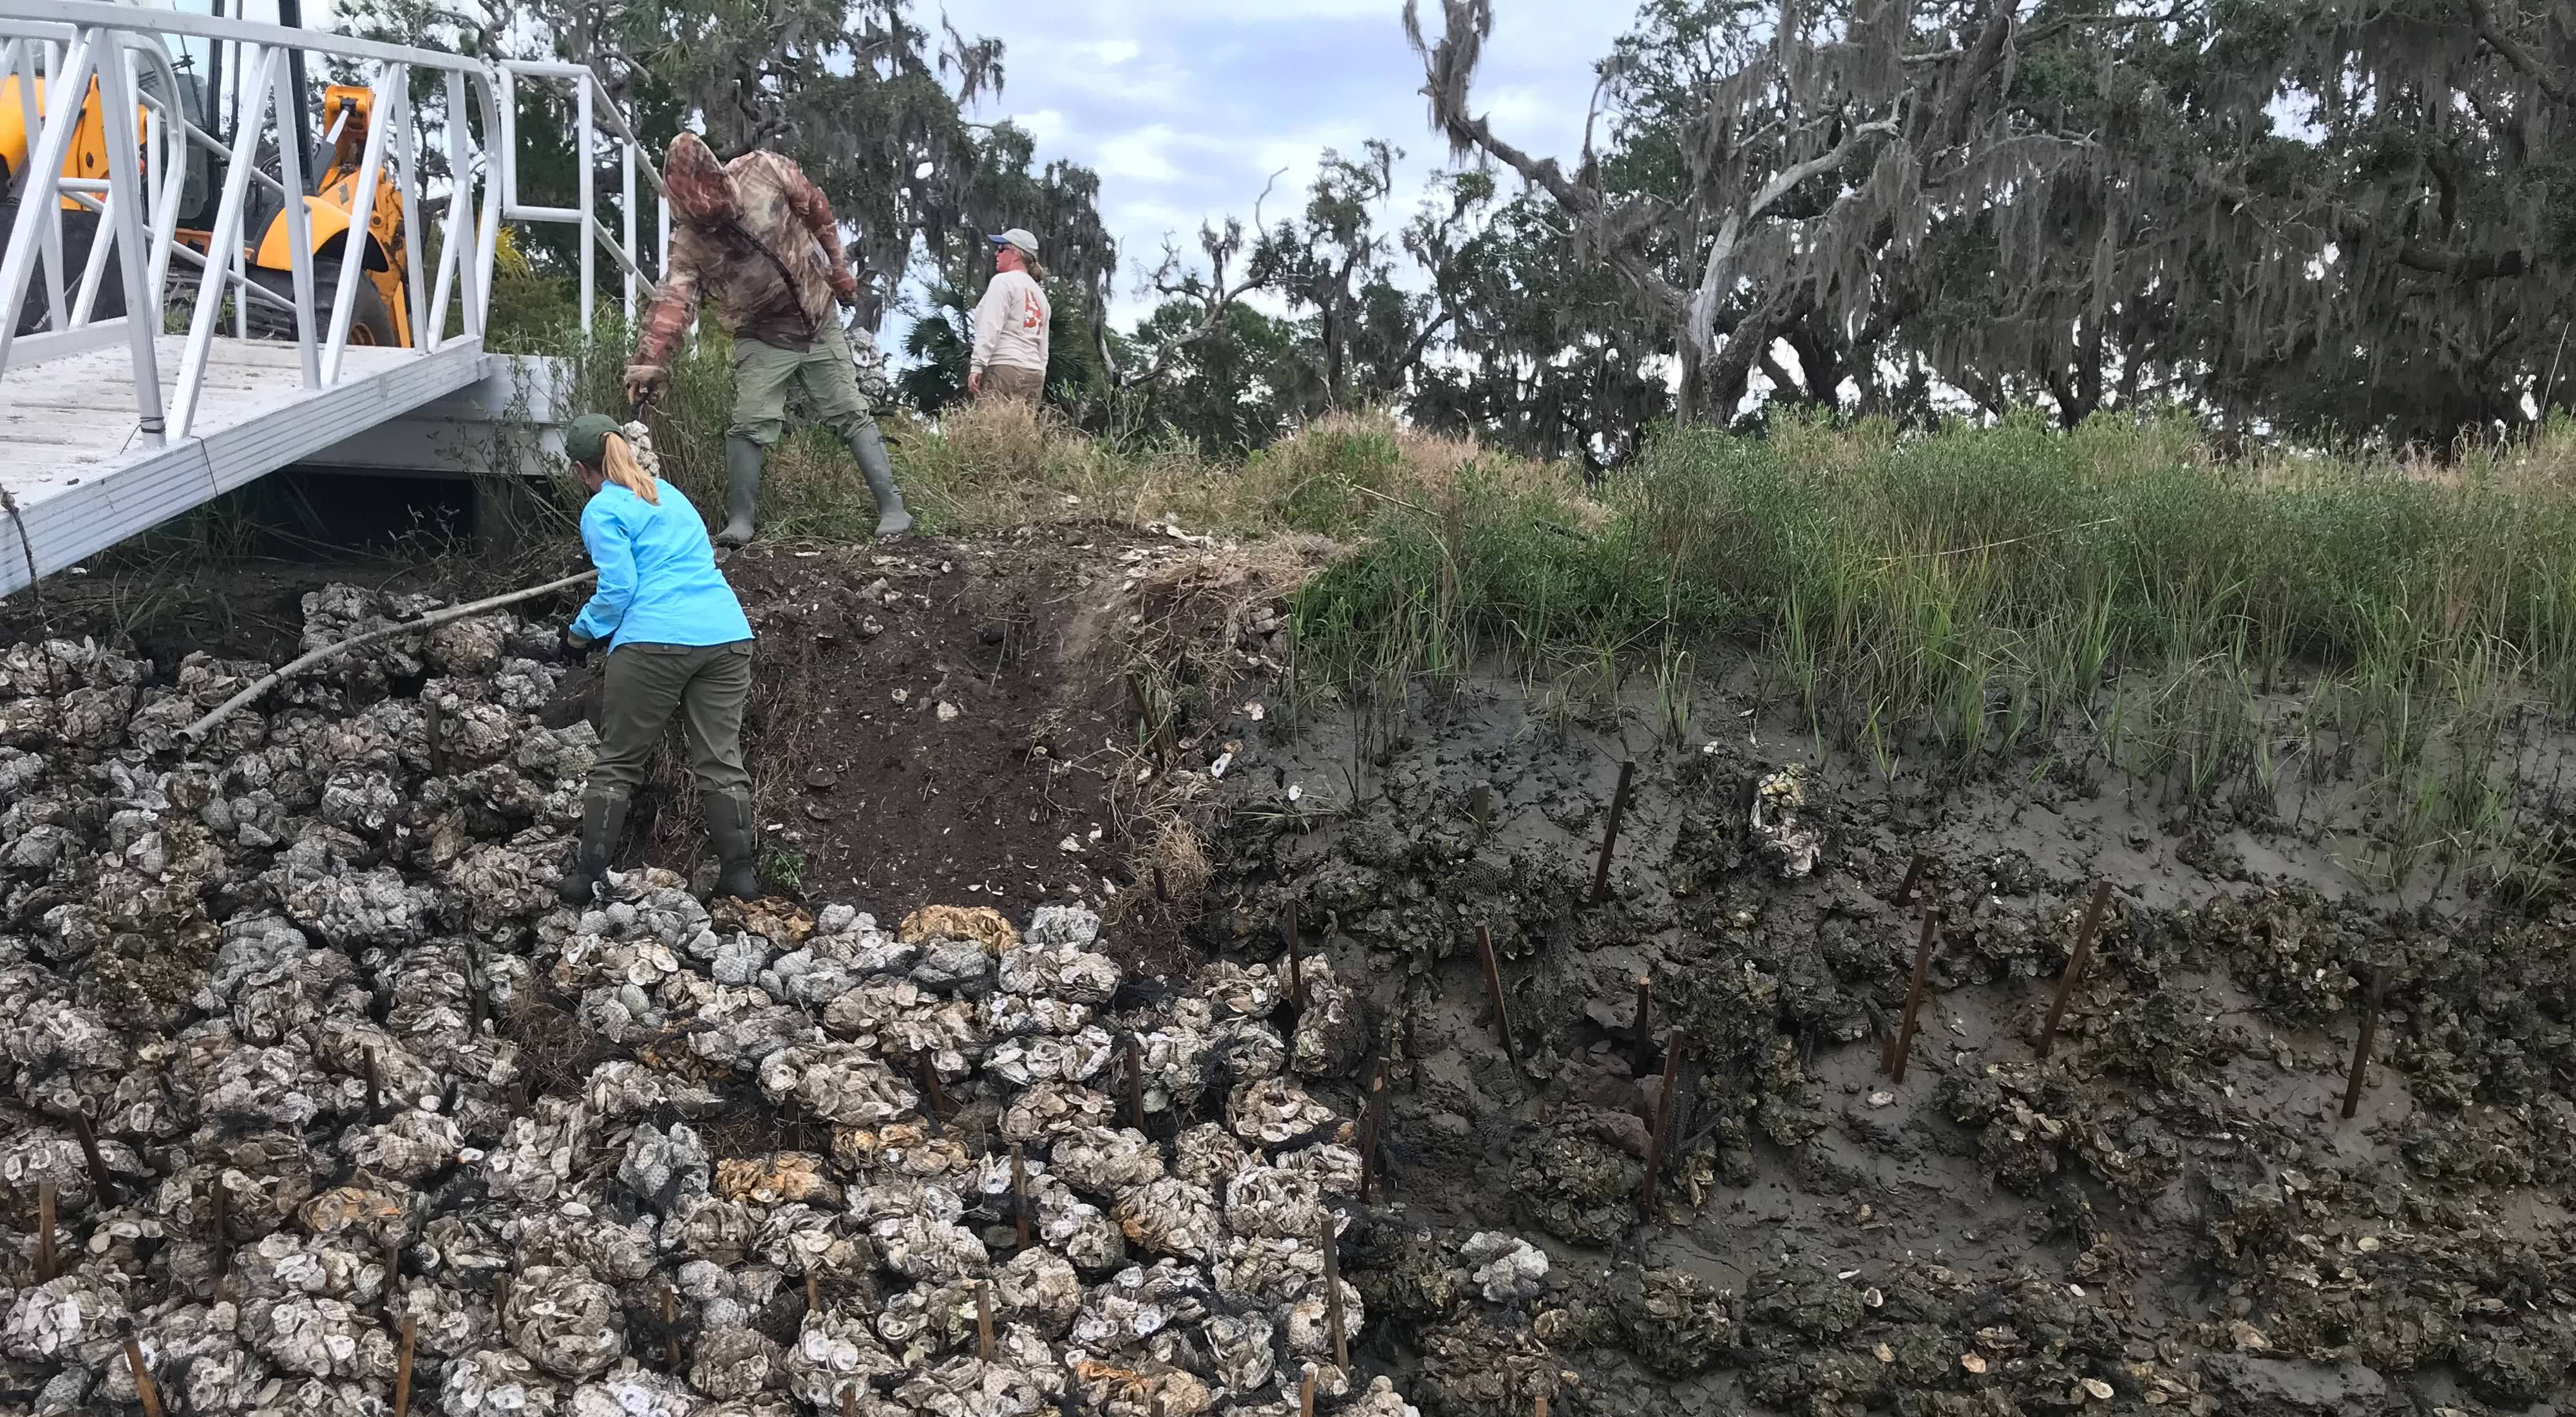 People placing bags of oyster shells to stabilize a muddy slope on a shoreline.